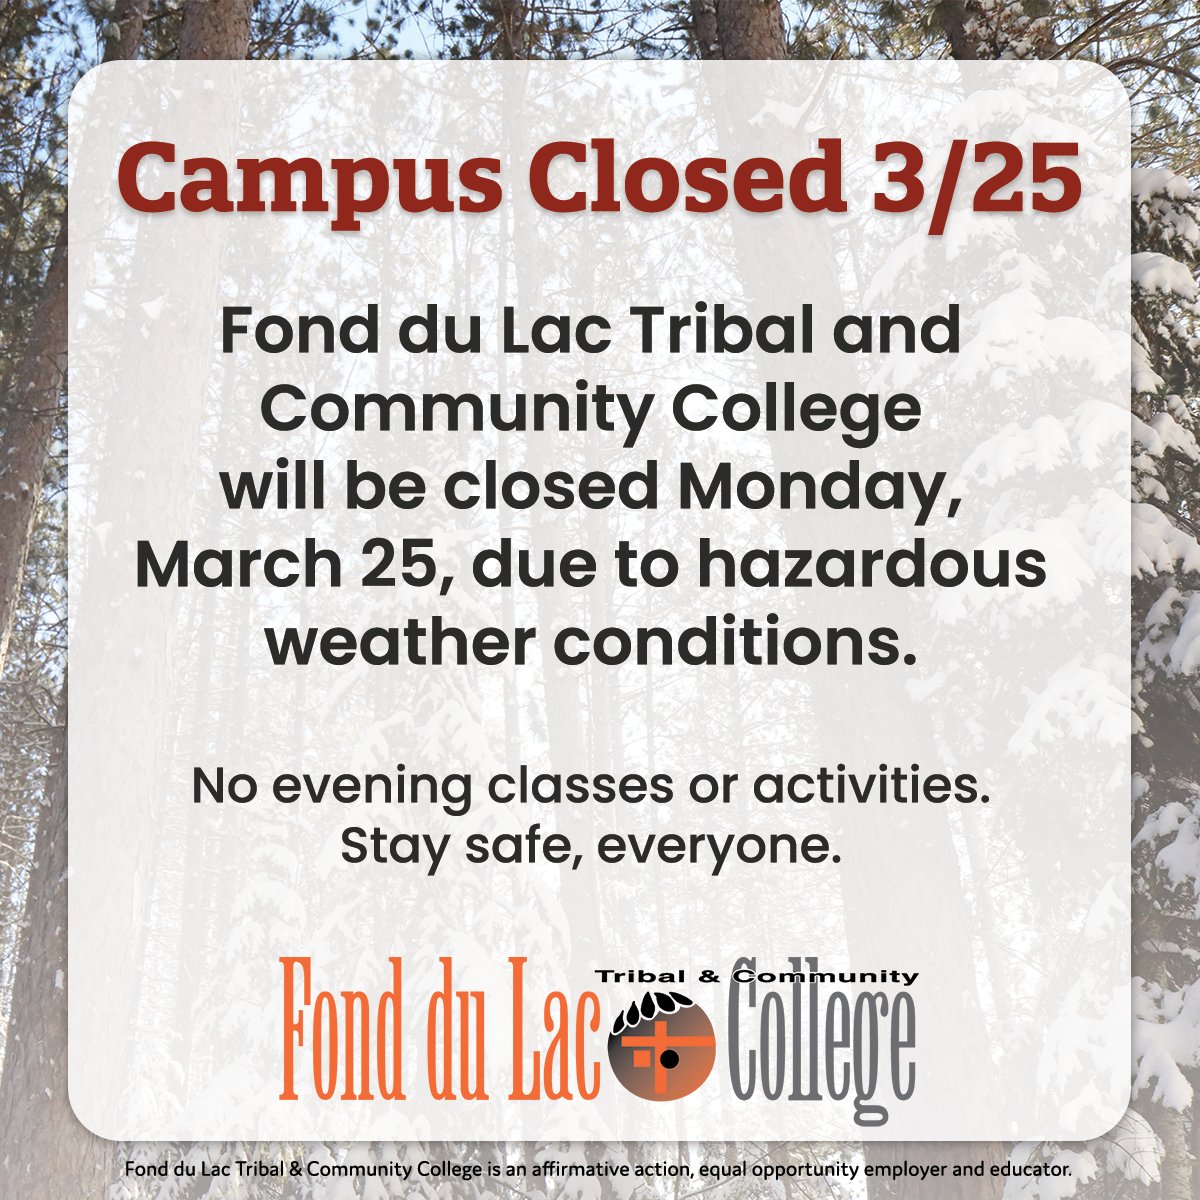 #FDLTCC will be closed Monday, March 25, due to hazardous weather conditions. No evening classes or activities. Stay safe everyone!